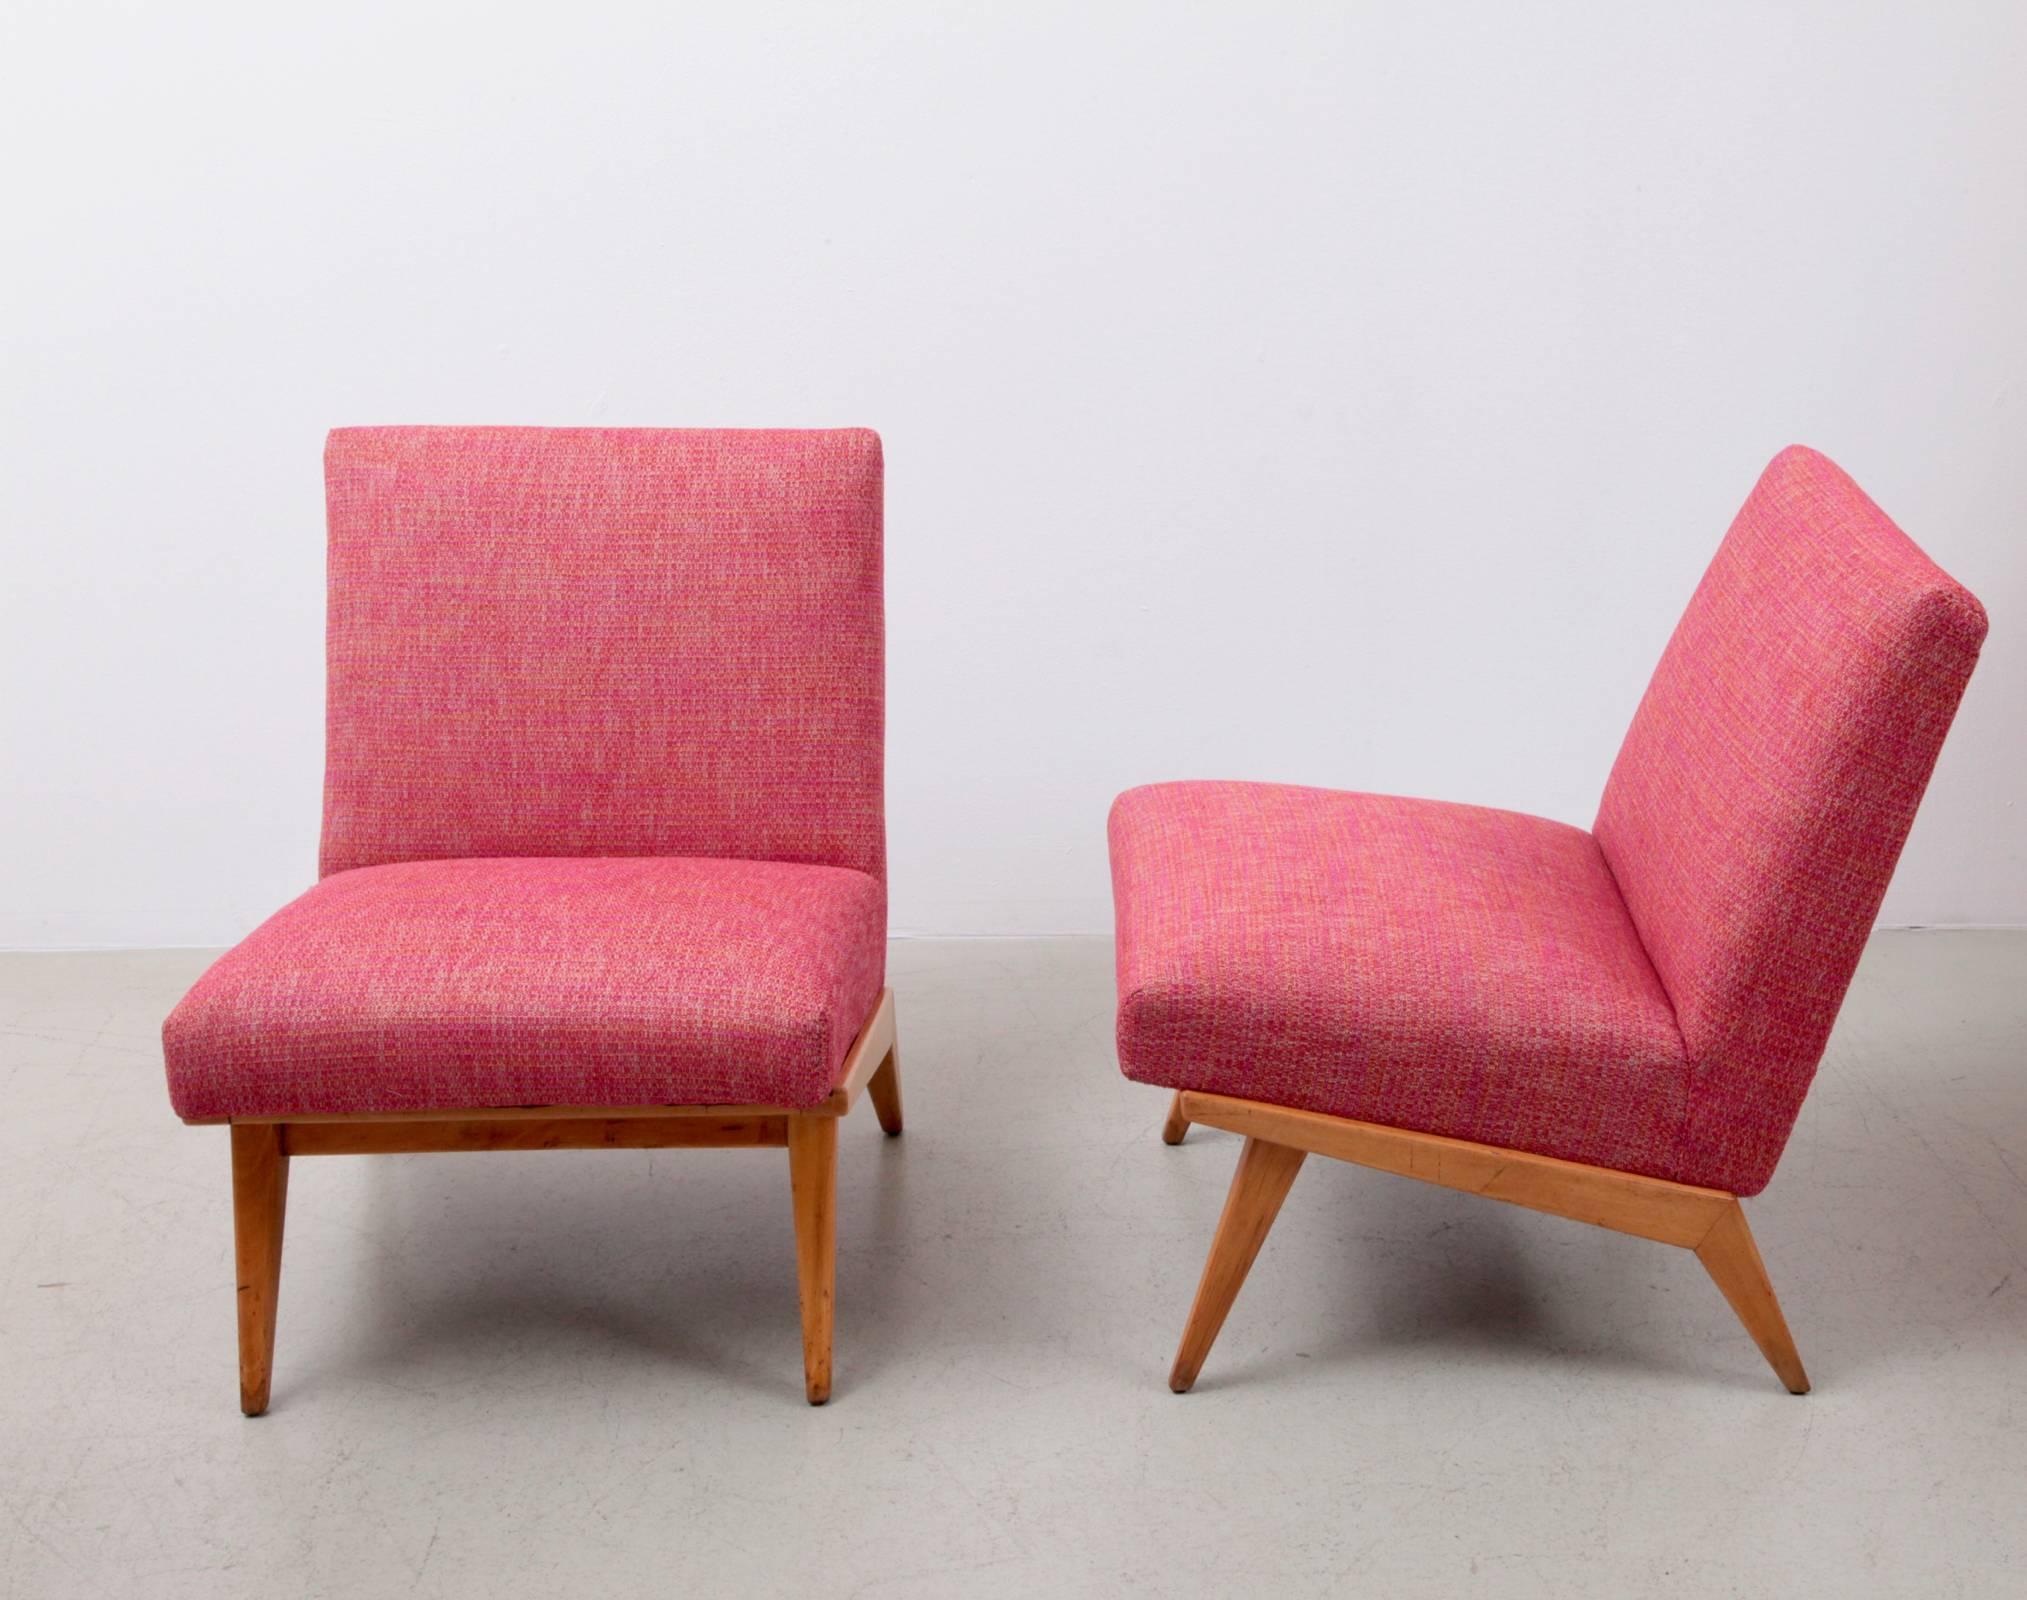 New upholstered pair of Jens Risom lounge chairs in a pinkish fabric.
Condition is excellent.

